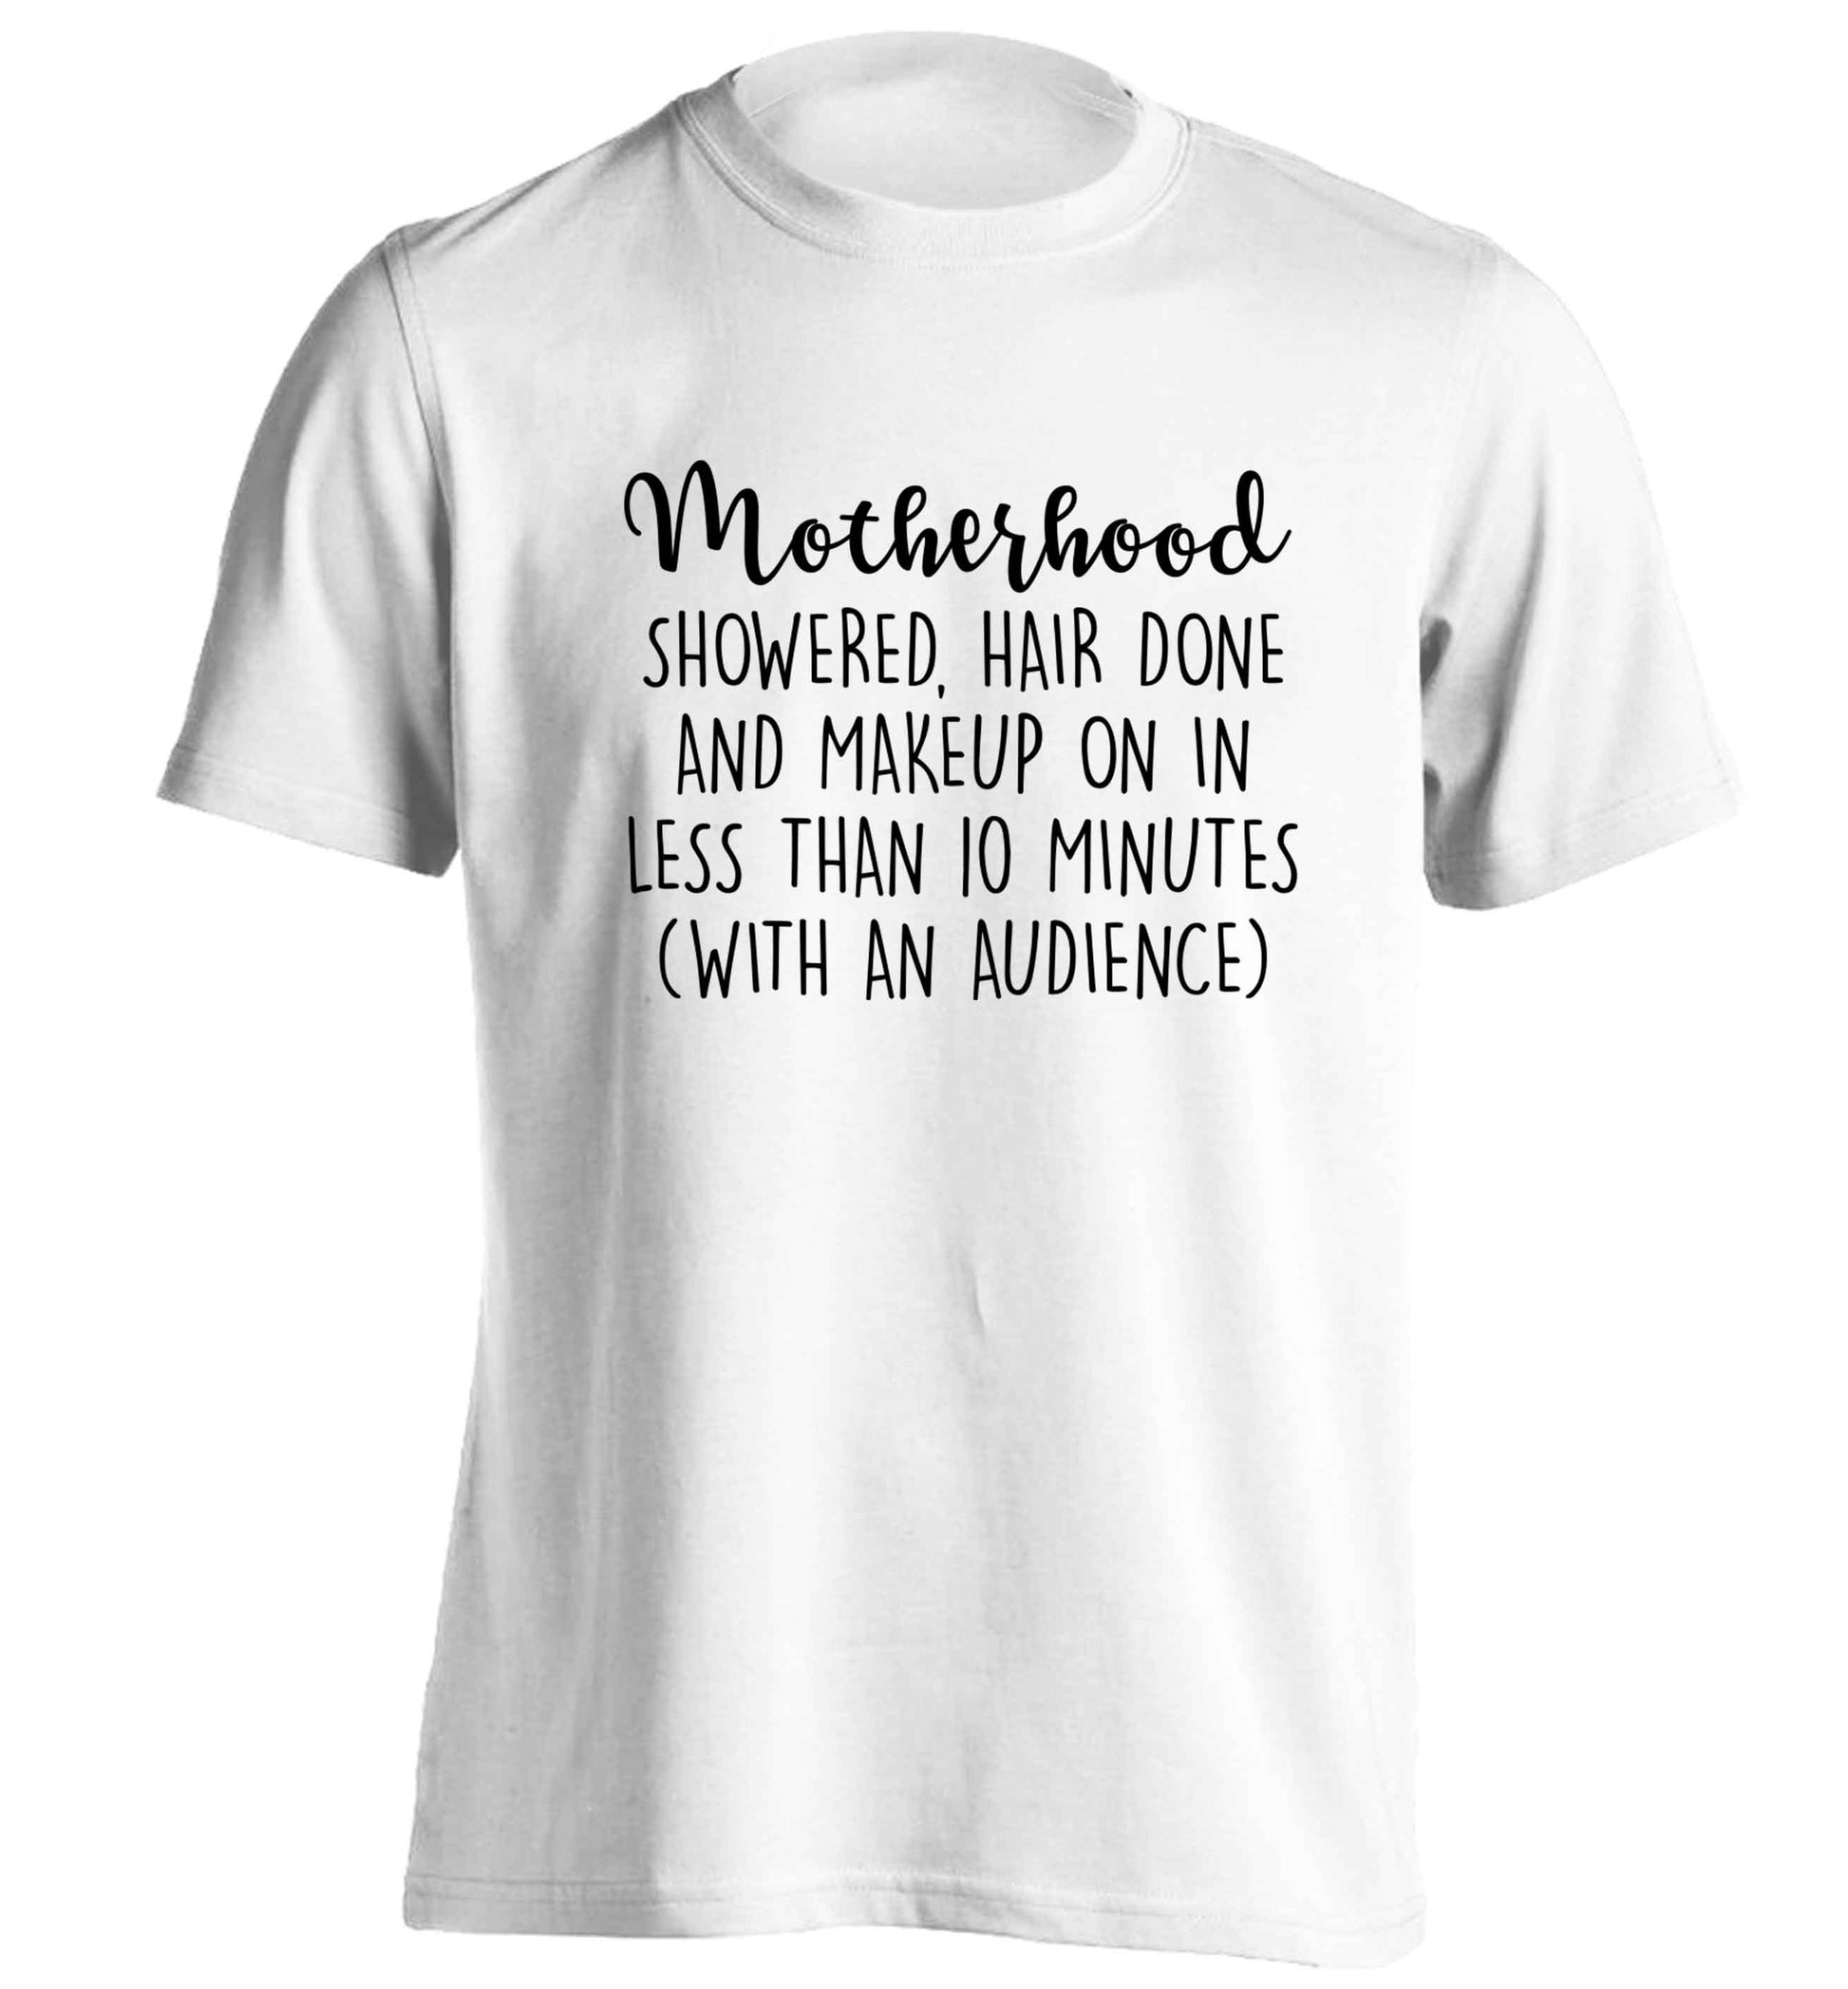 Motherhood, showered, hair done and makeup on adults unisex white Tshirt 2XL